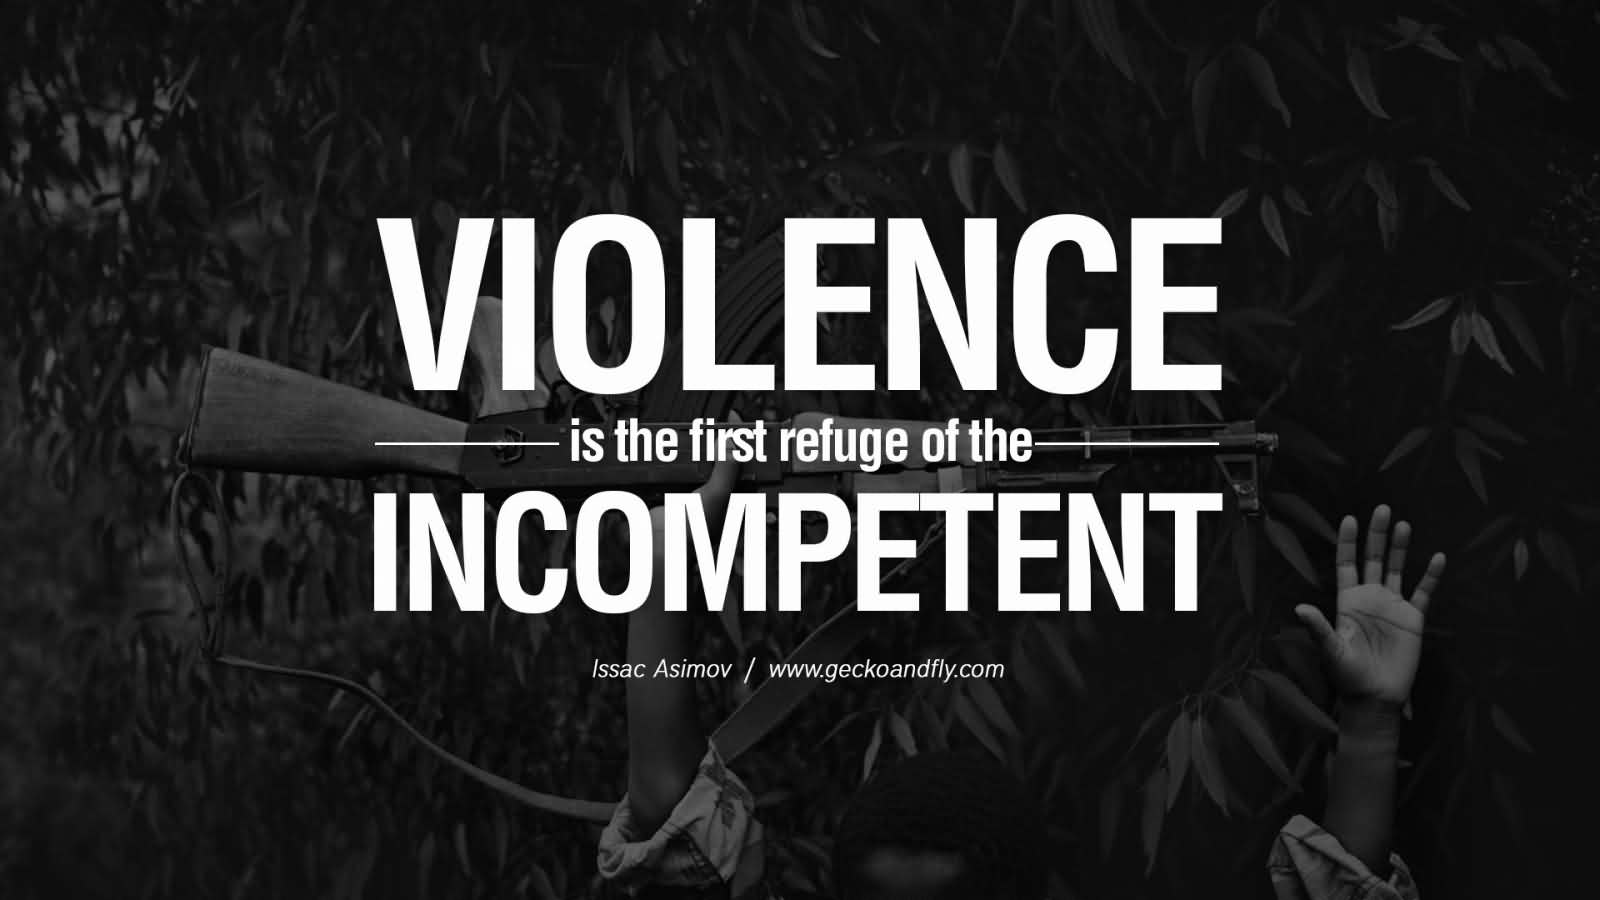 Violence is the first refuge of the incompetent. - Issac Asimov